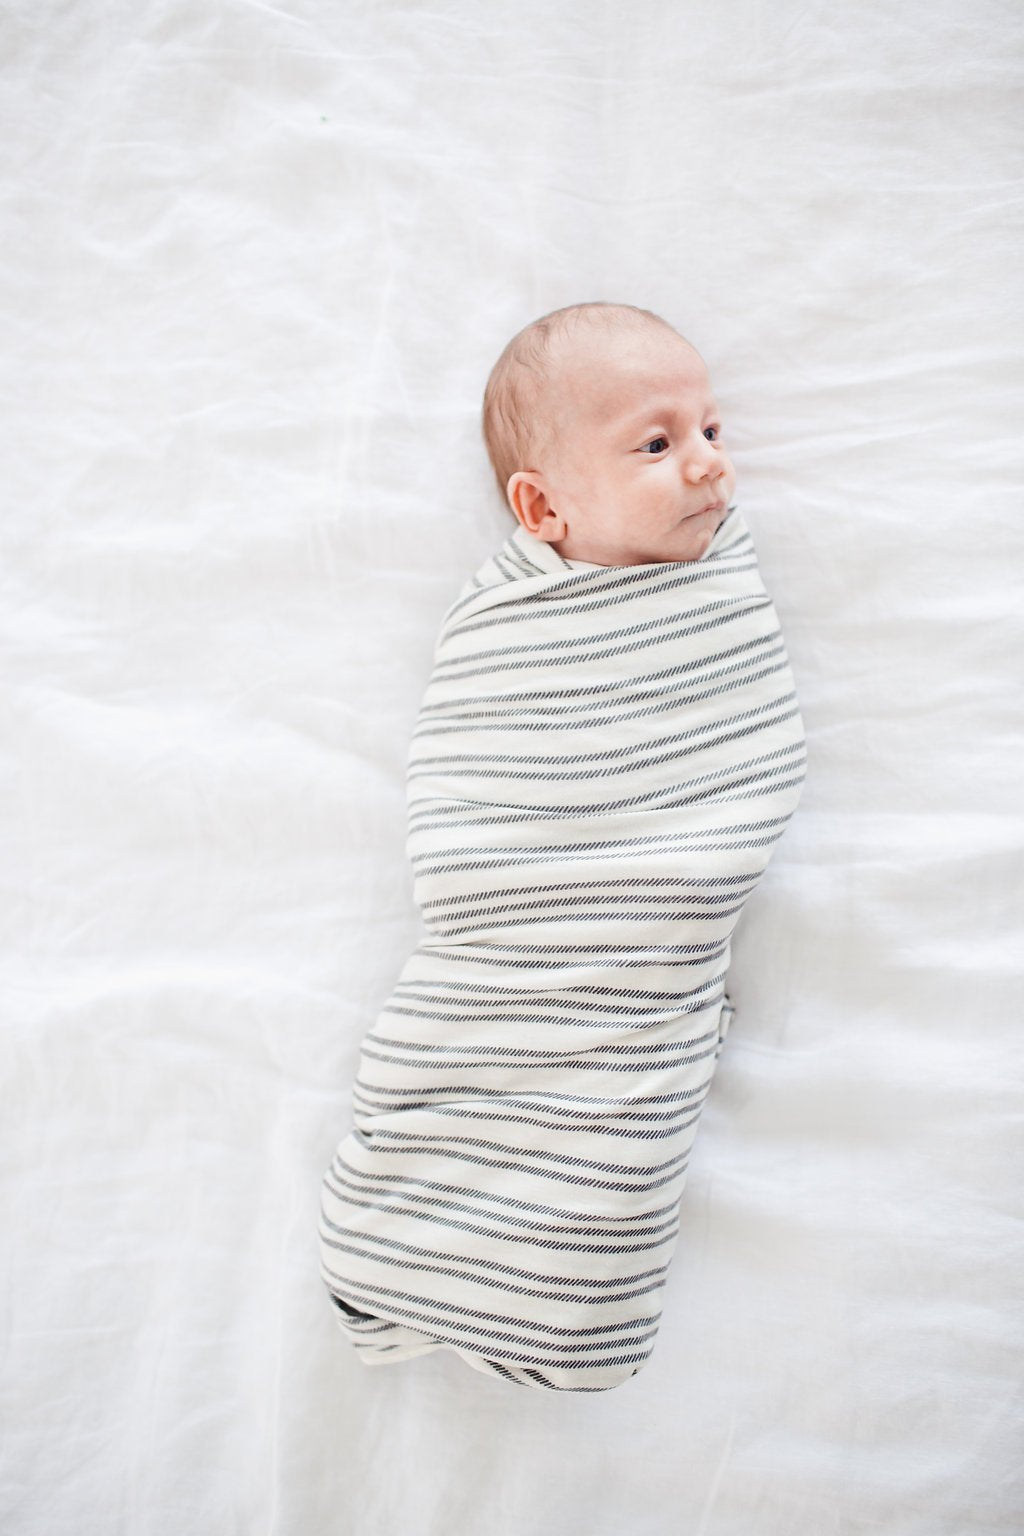 The Attic Boutique Midtown Swaddle Blanket Baby & Toddler - The Attic Boutique